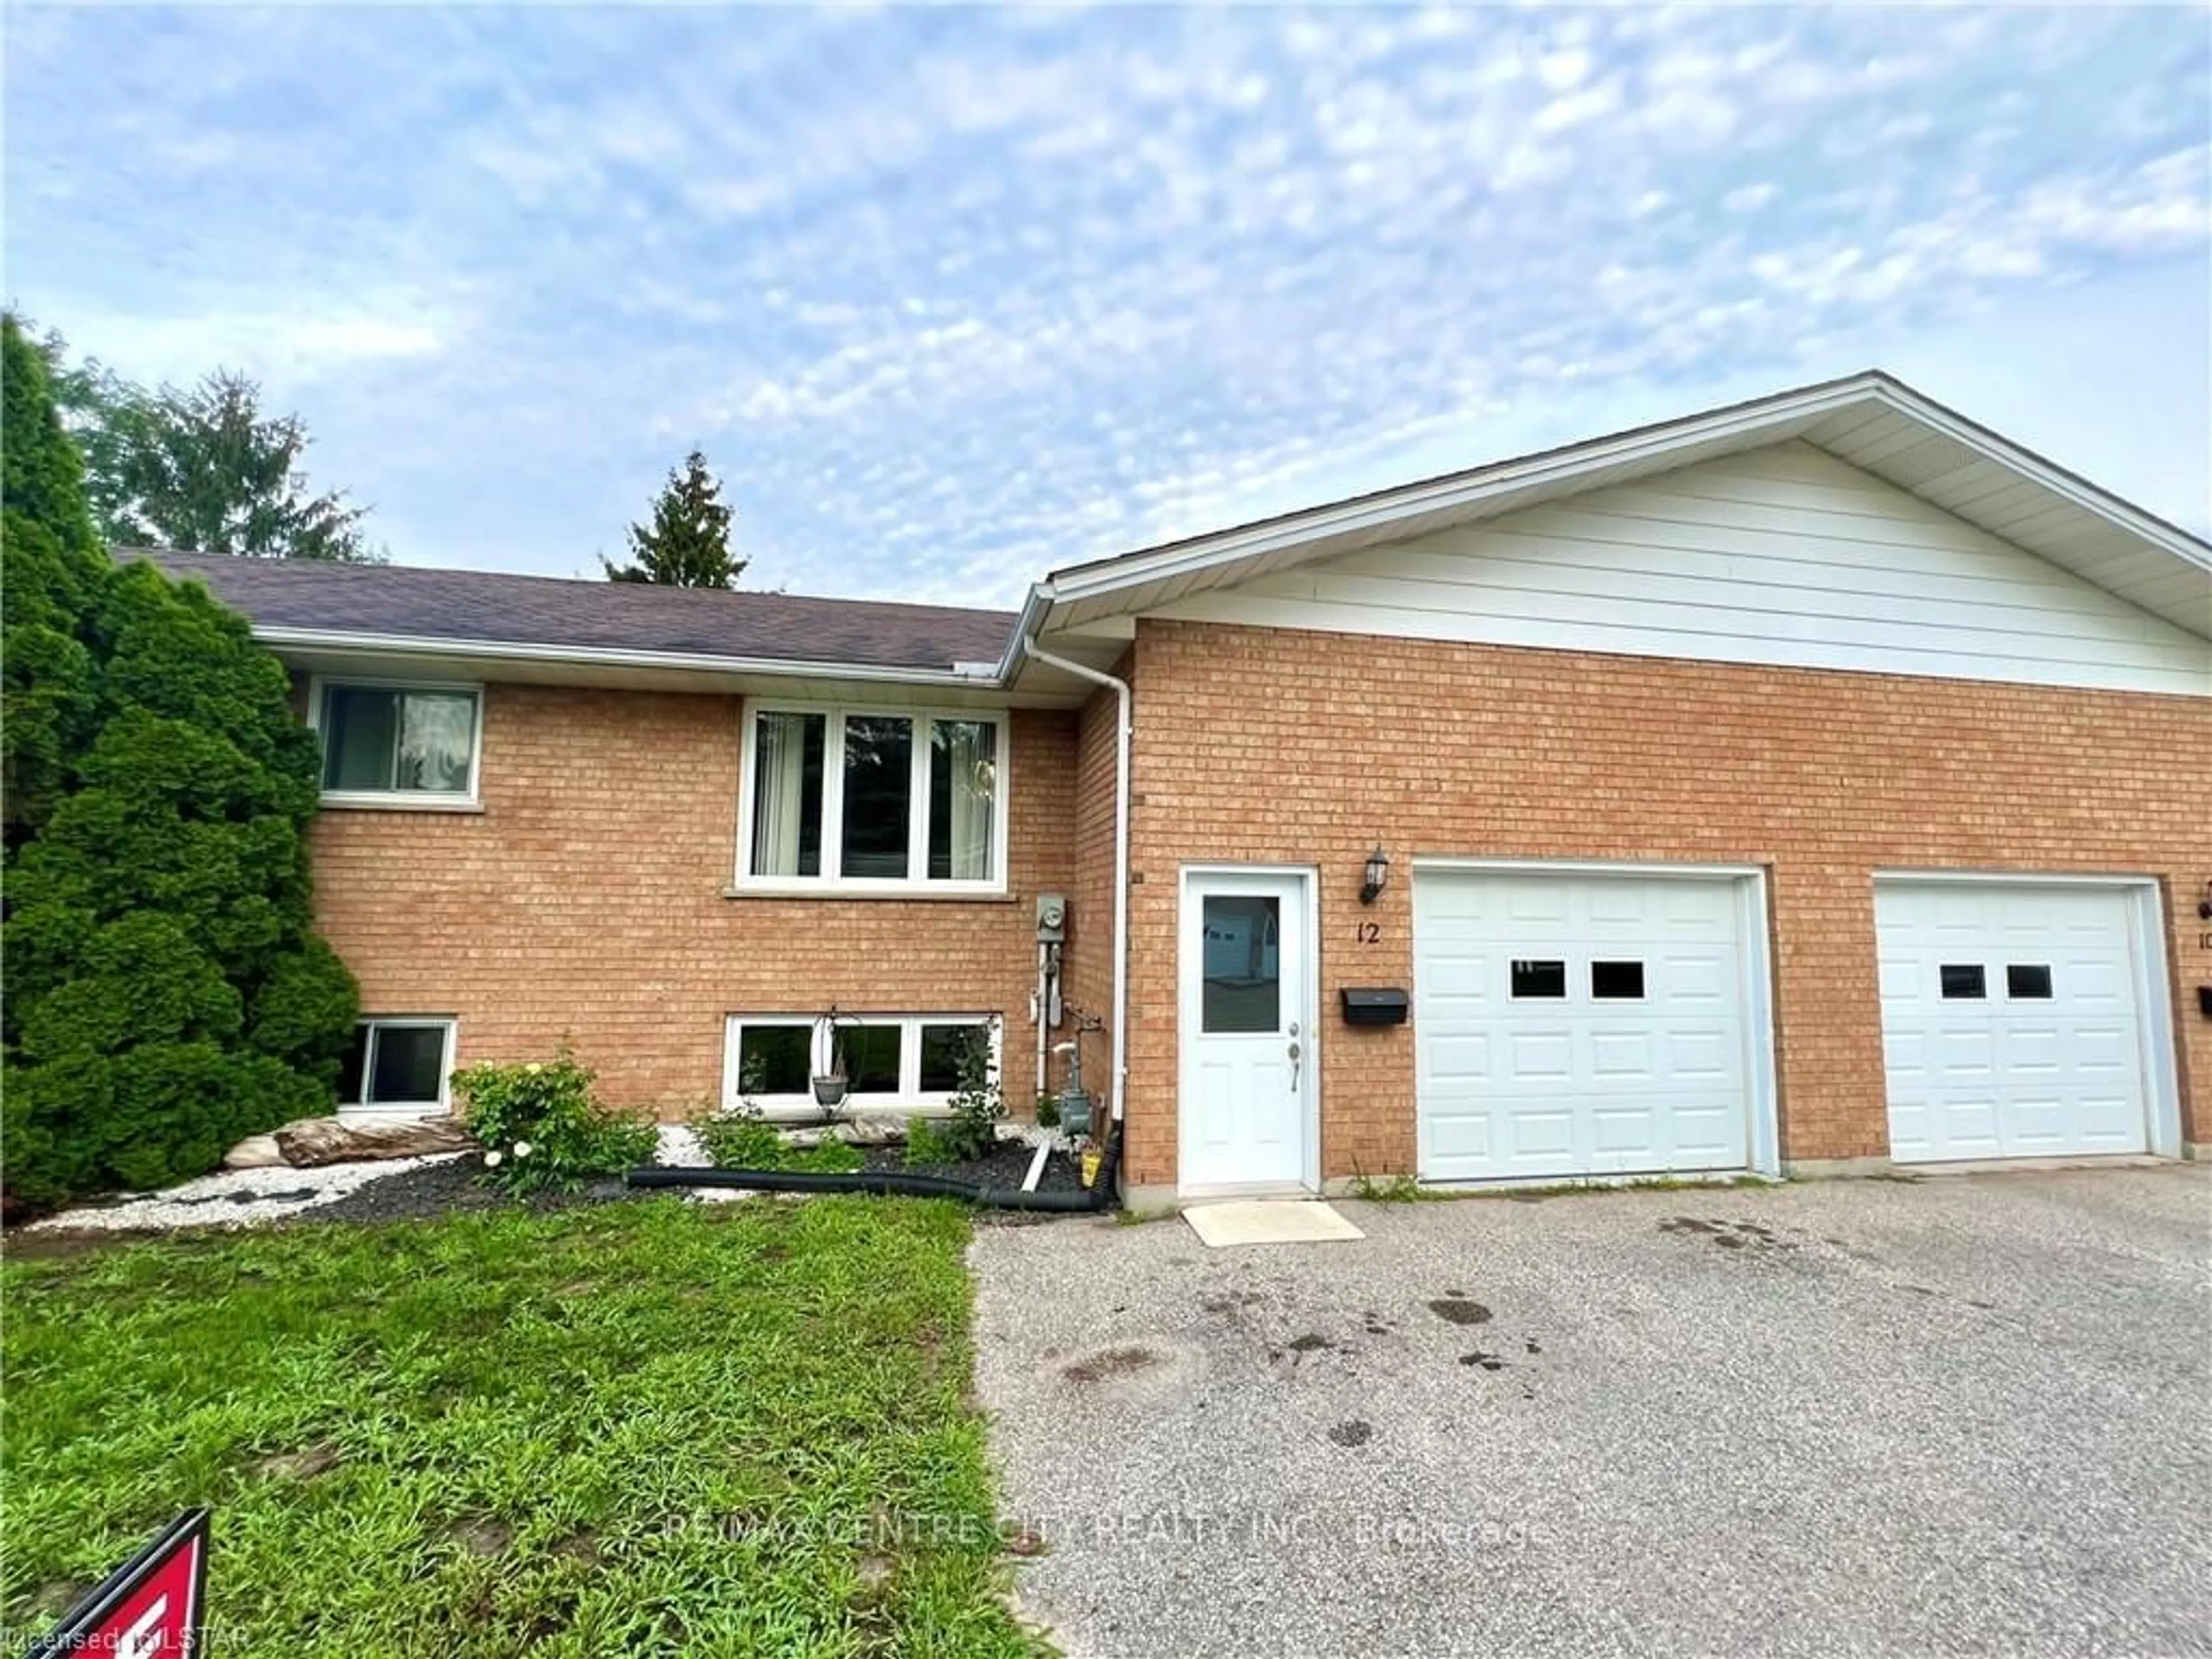 Frontside or backside of a home for 214 South St #12, Aylmer Ontario N5H 3E6